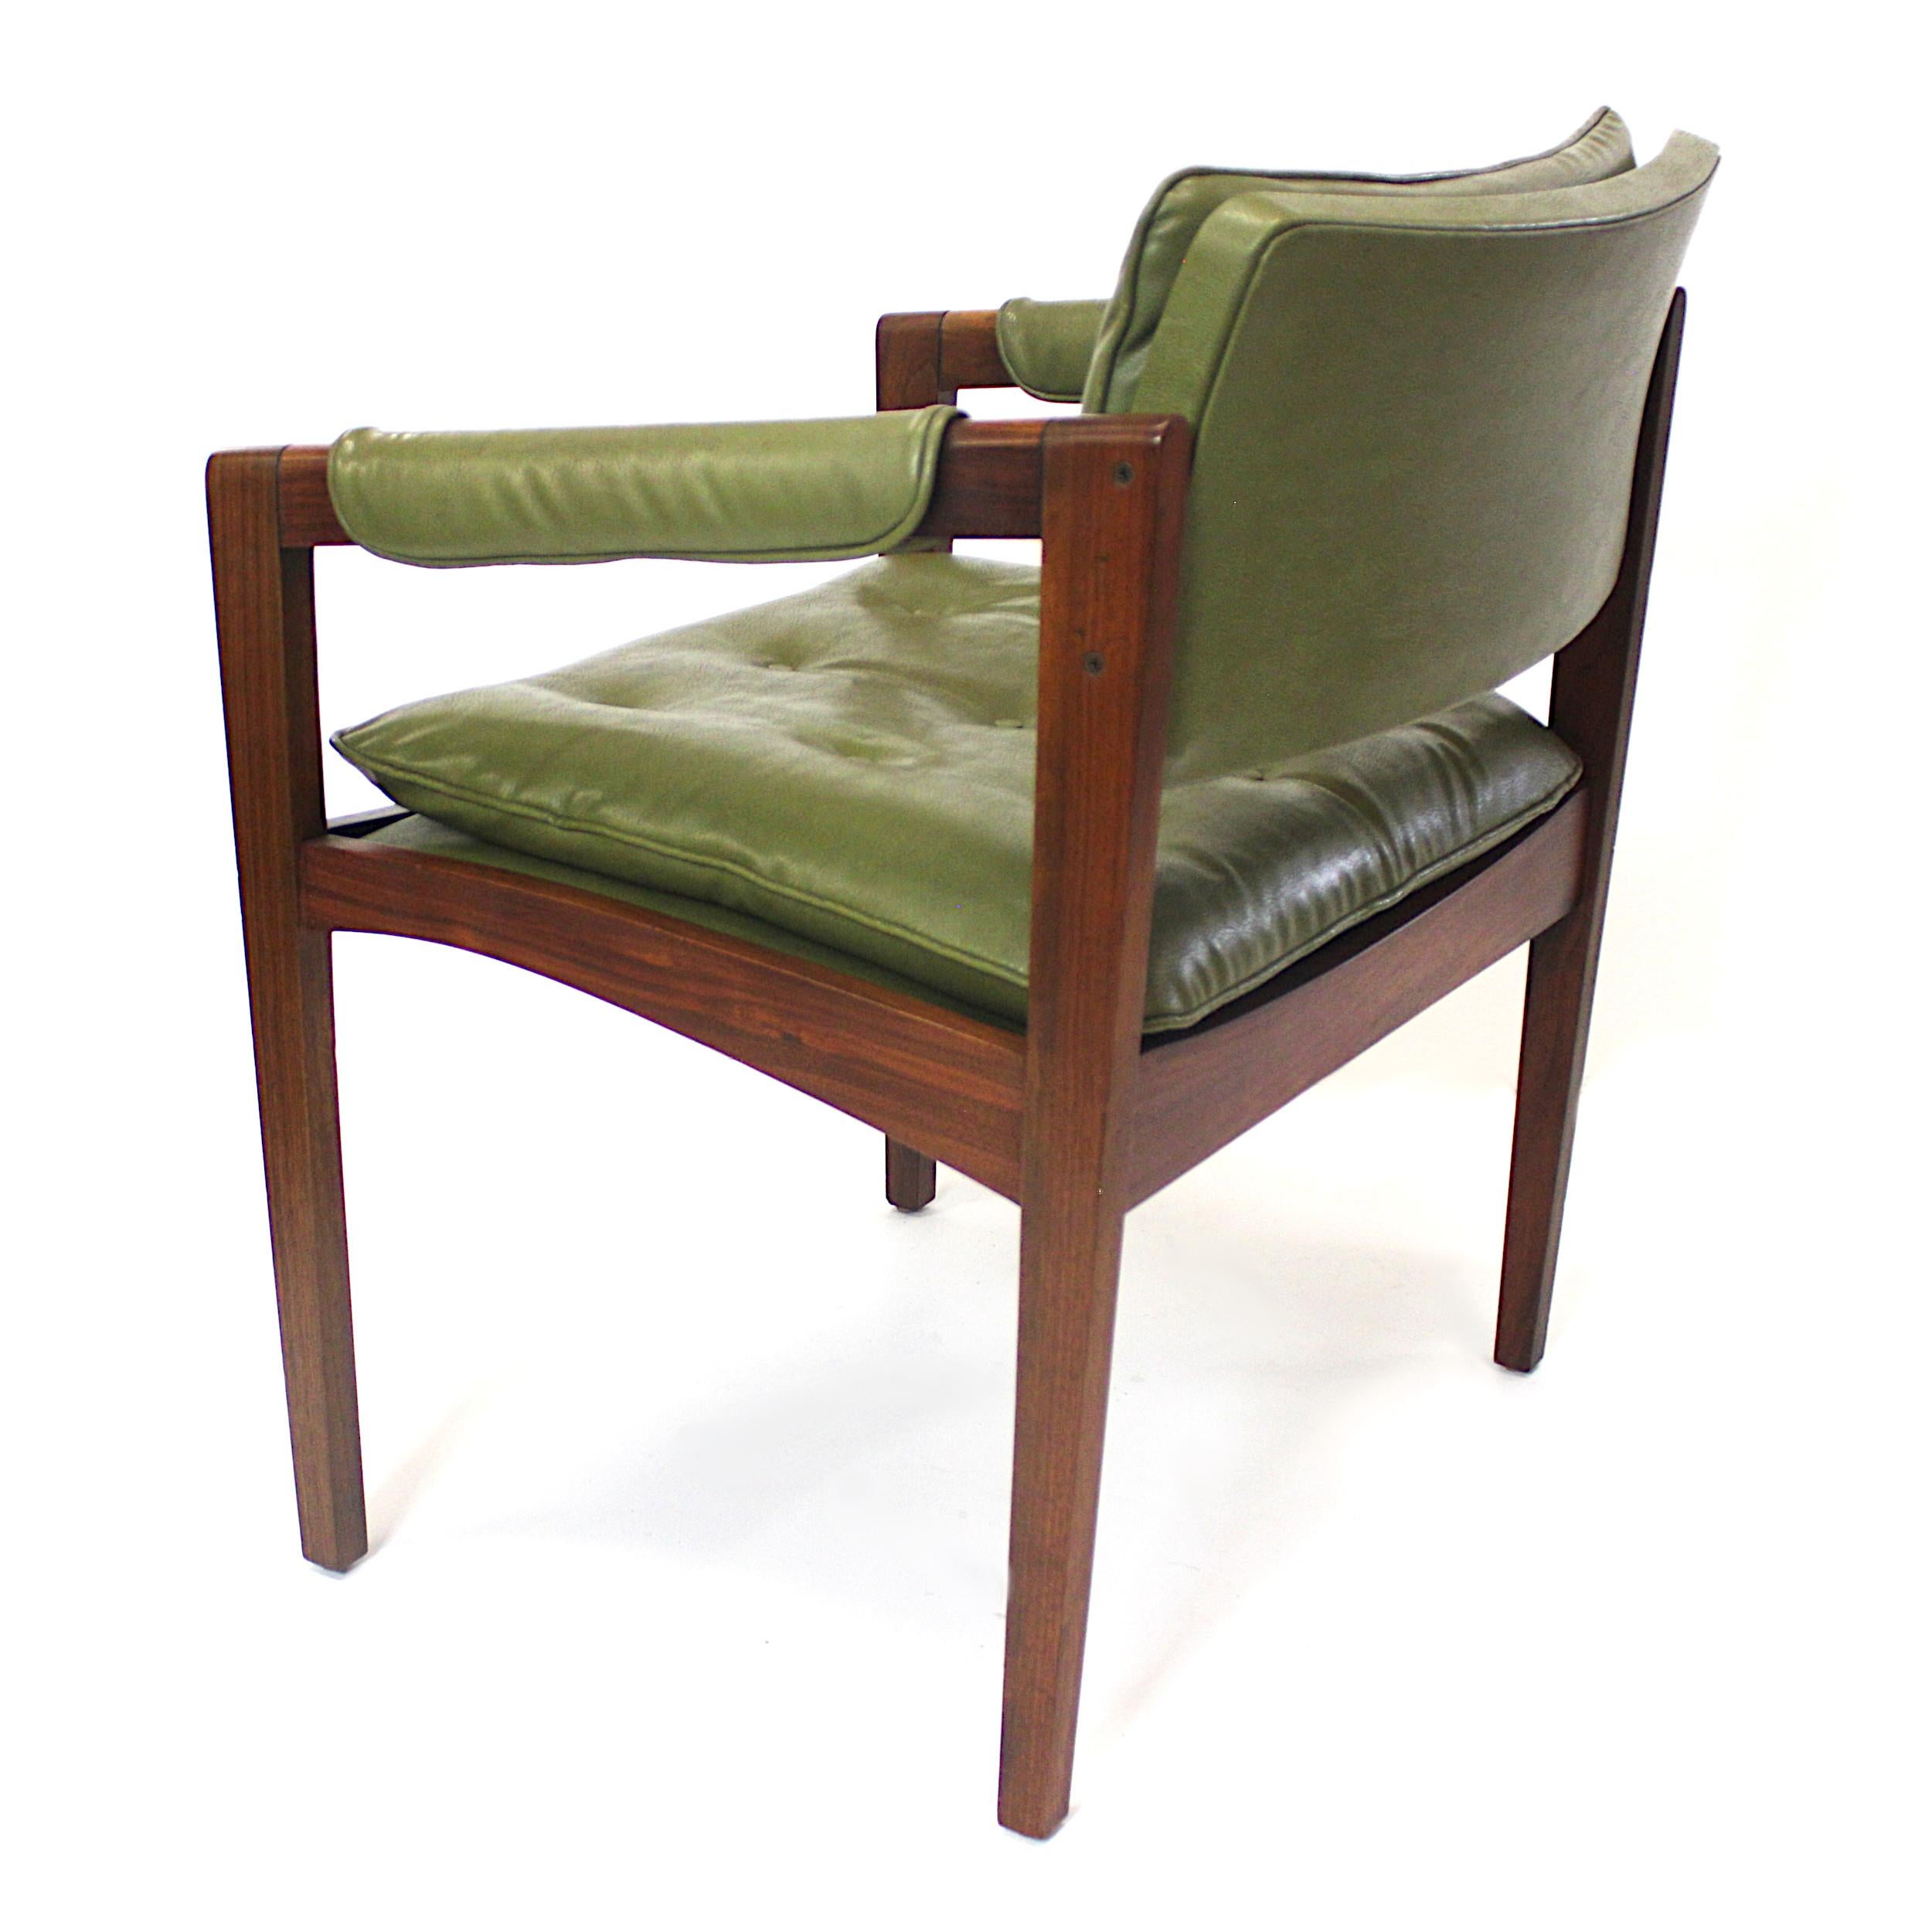 Unusual Pair of Green Mid-Century Modern Lounge Chairs by Glenn of California 1